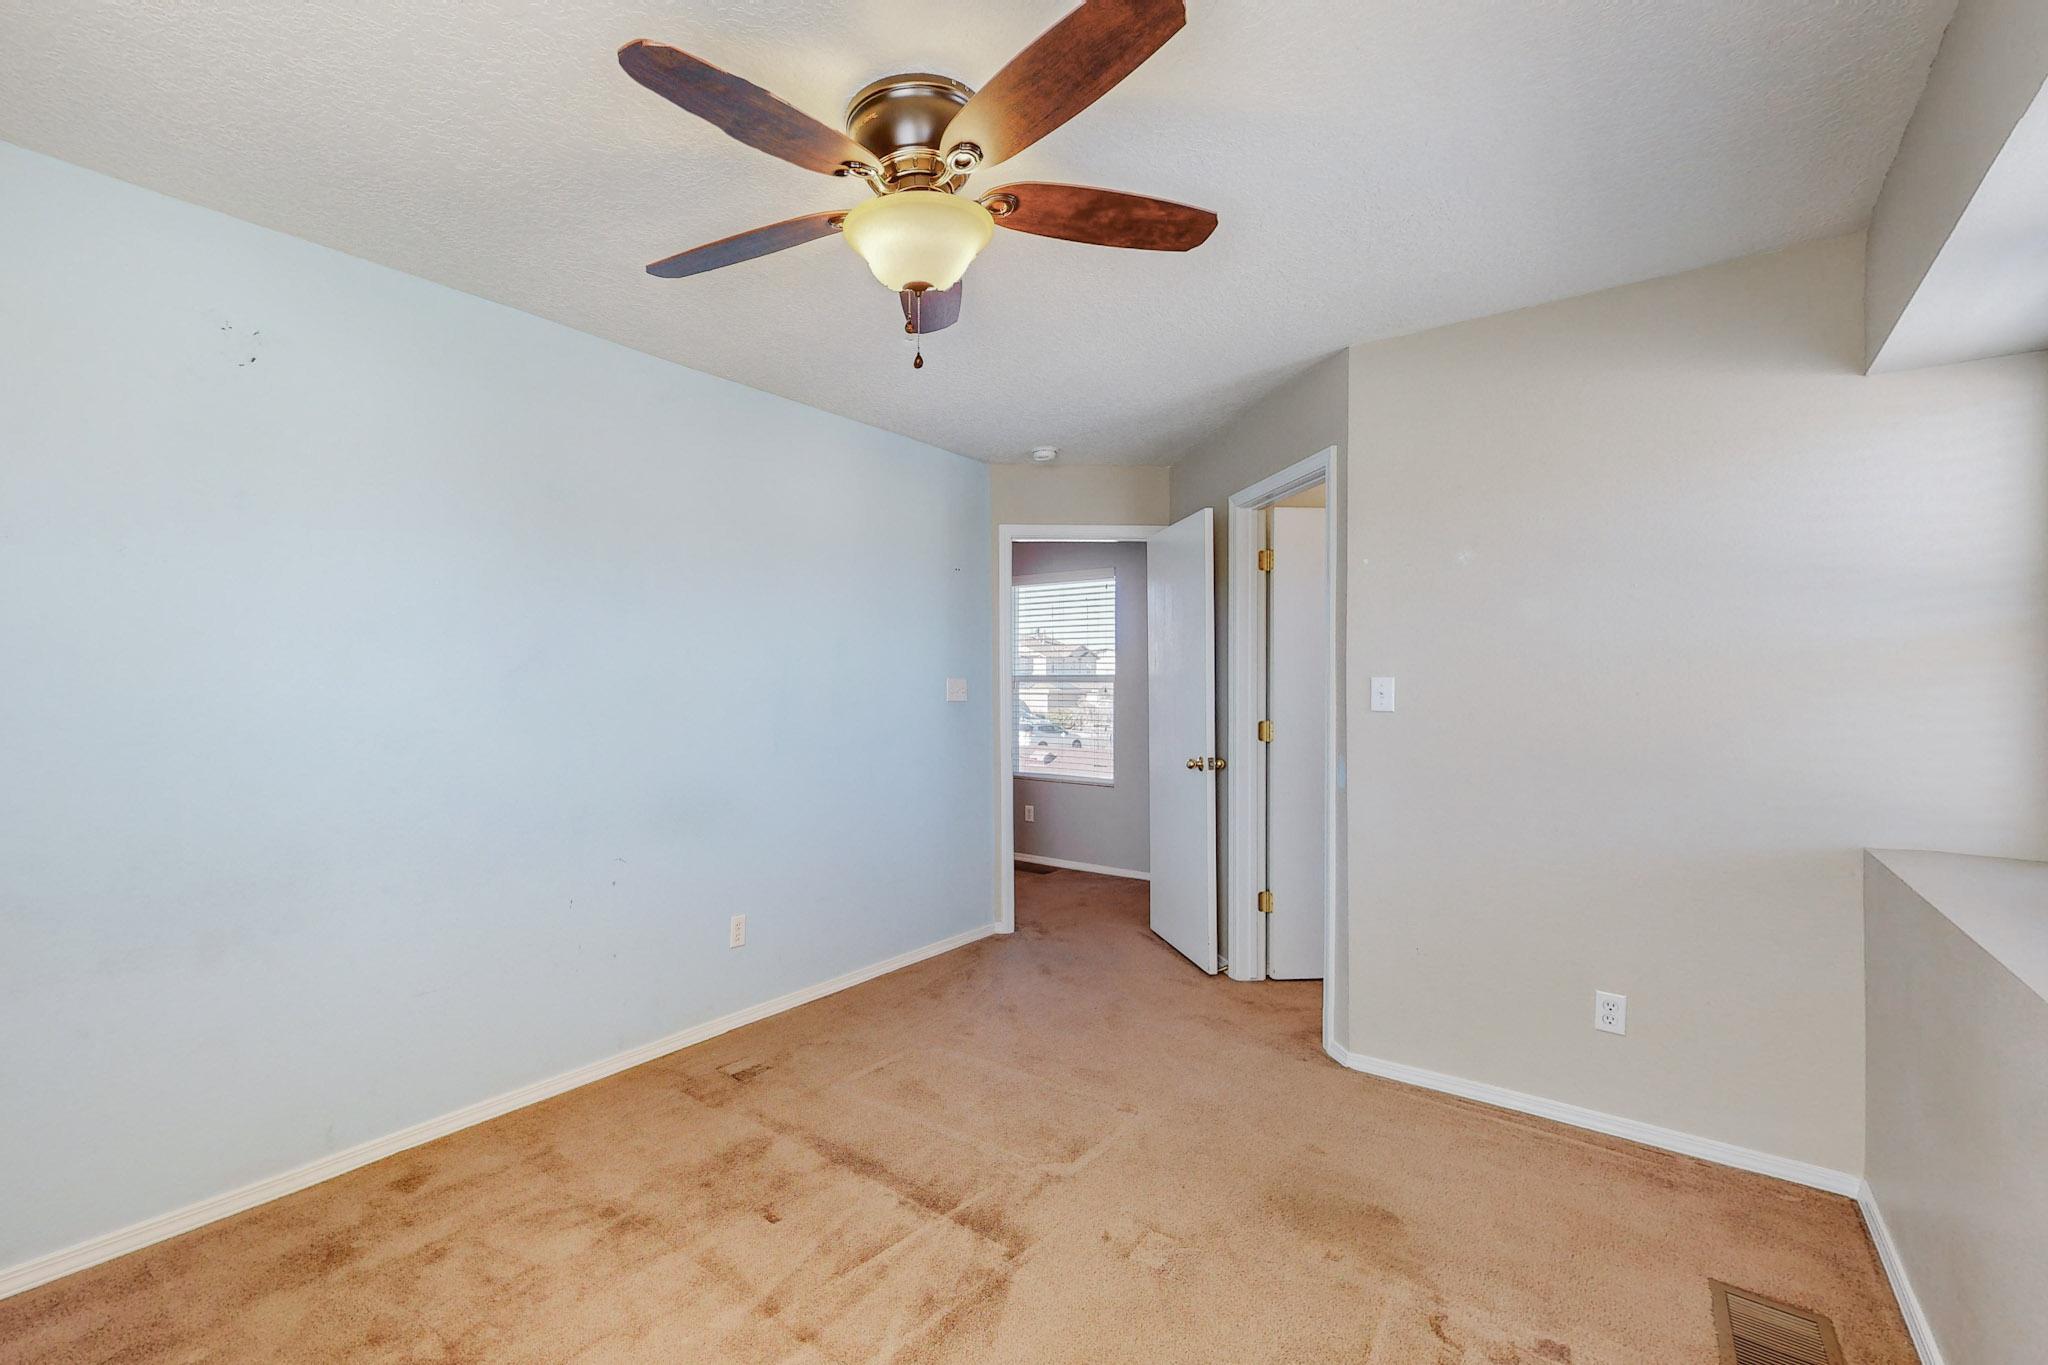 6015 Park South Place NW, Albuquerque, New Mexico 87114, 3 Bedrooms Bedrooms, ,3 BathroomsBathrooms,Residential,For Sale,6015 Park South Place NW,1058350